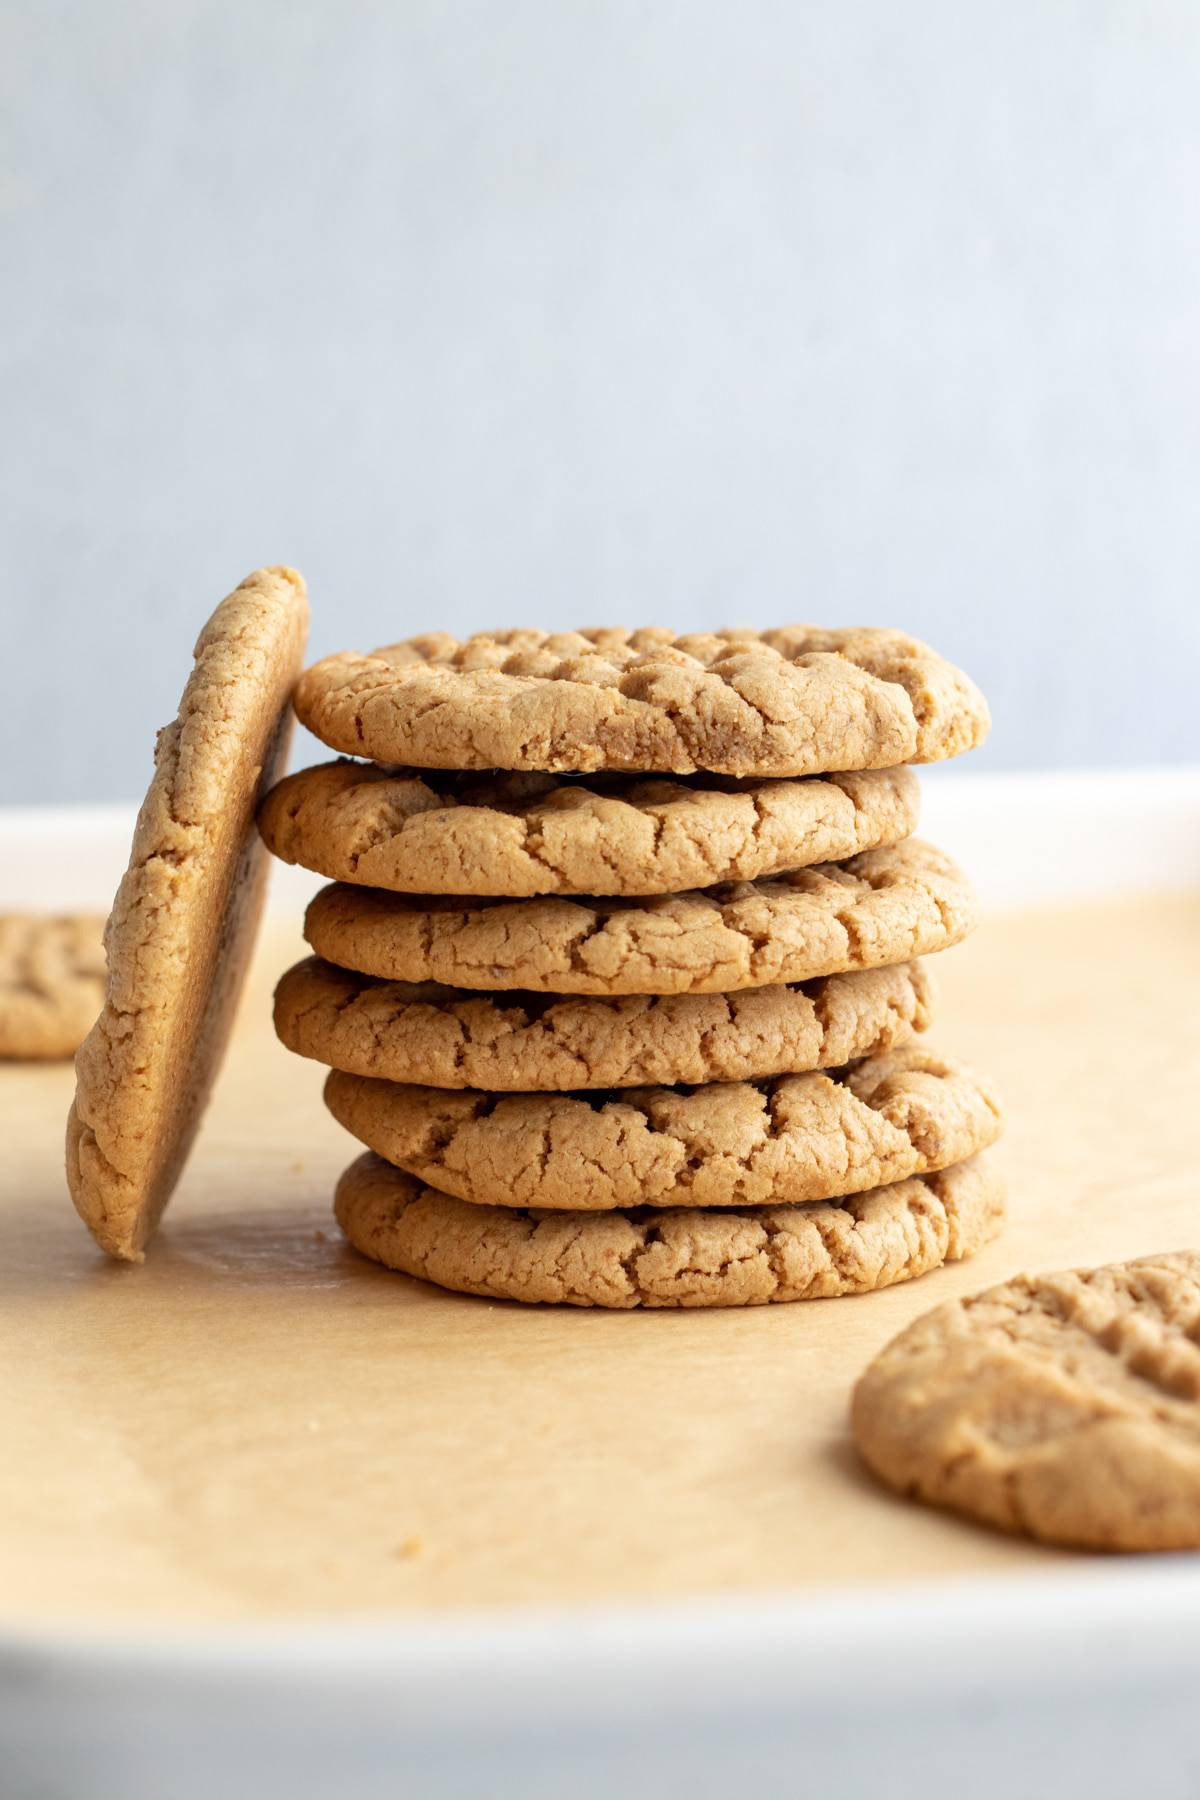 a stack of 6 cookies with one cookie leaning against the side